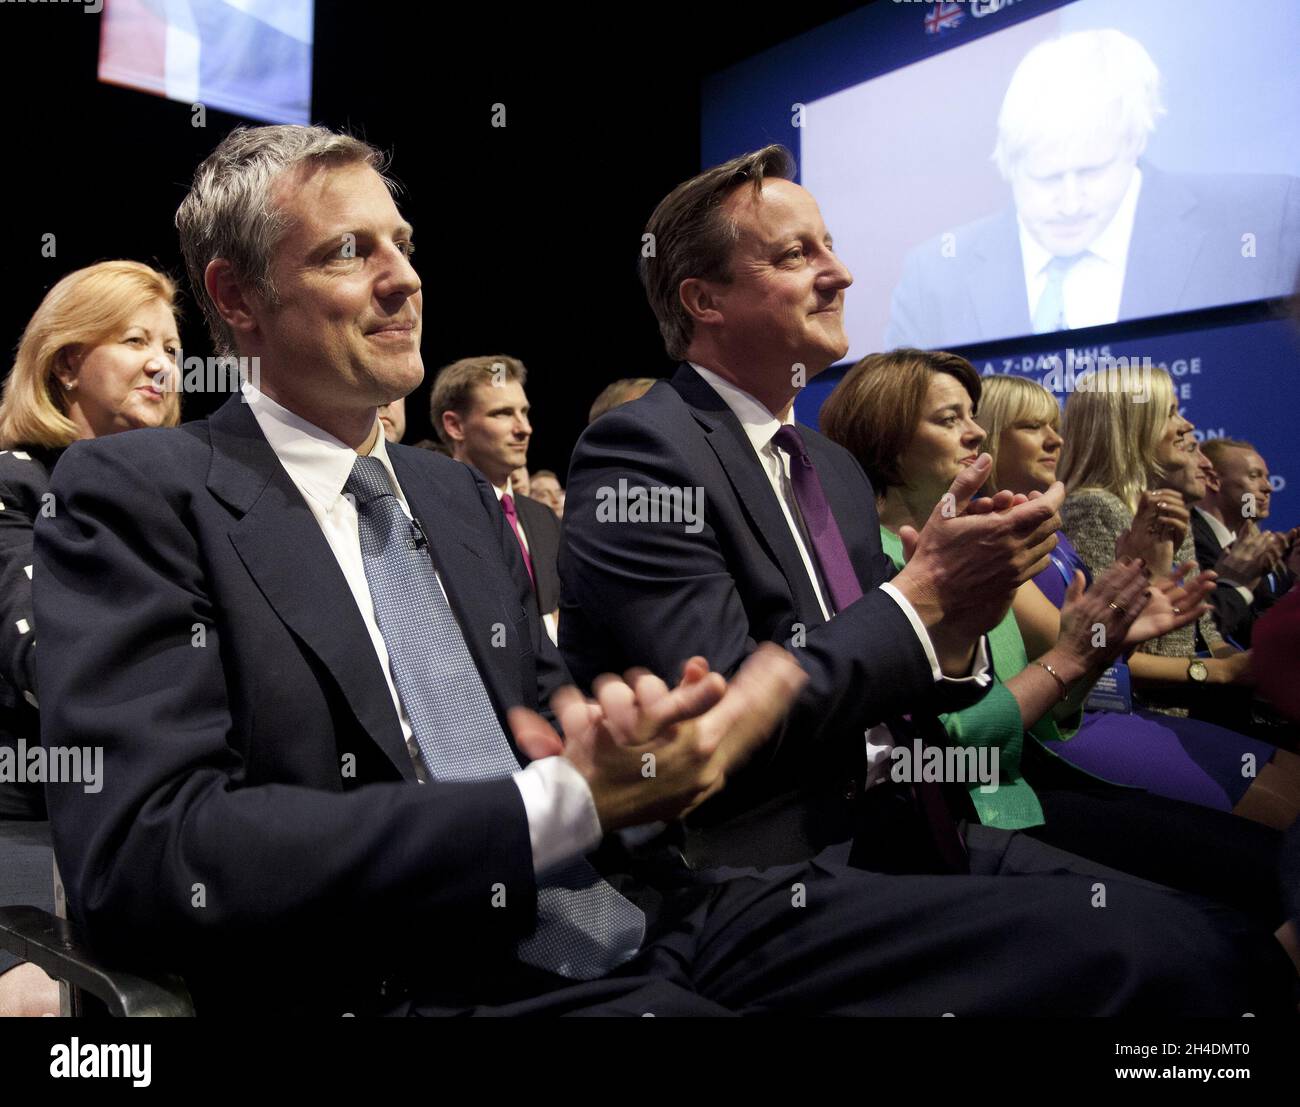 London mayoral candidate Zac Goldsmith and Prime Minister David Cameron listen to Mayor of London Boris Johnson delivering his speech to delegates in the third day of the Conservative Party annual conference at Manchester Central Convention Centre. Stock Photo